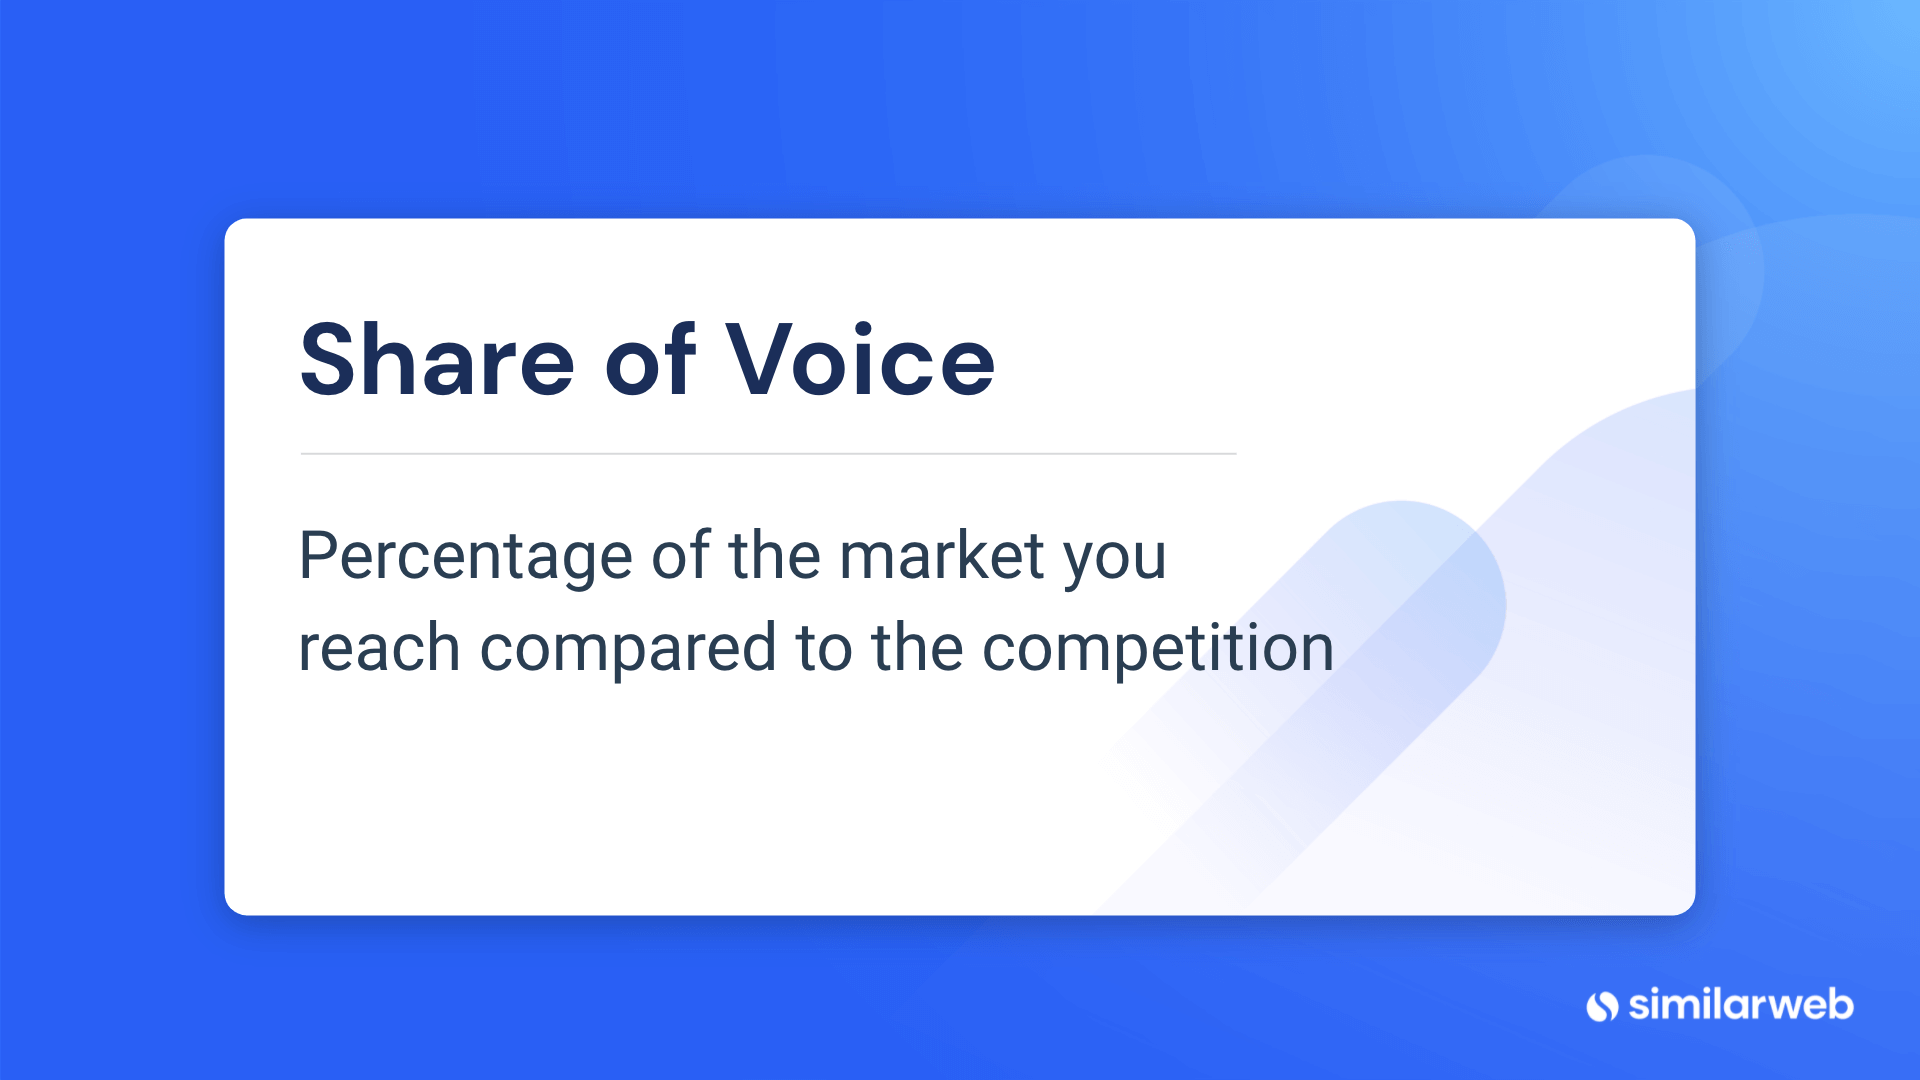 Share of voice definition